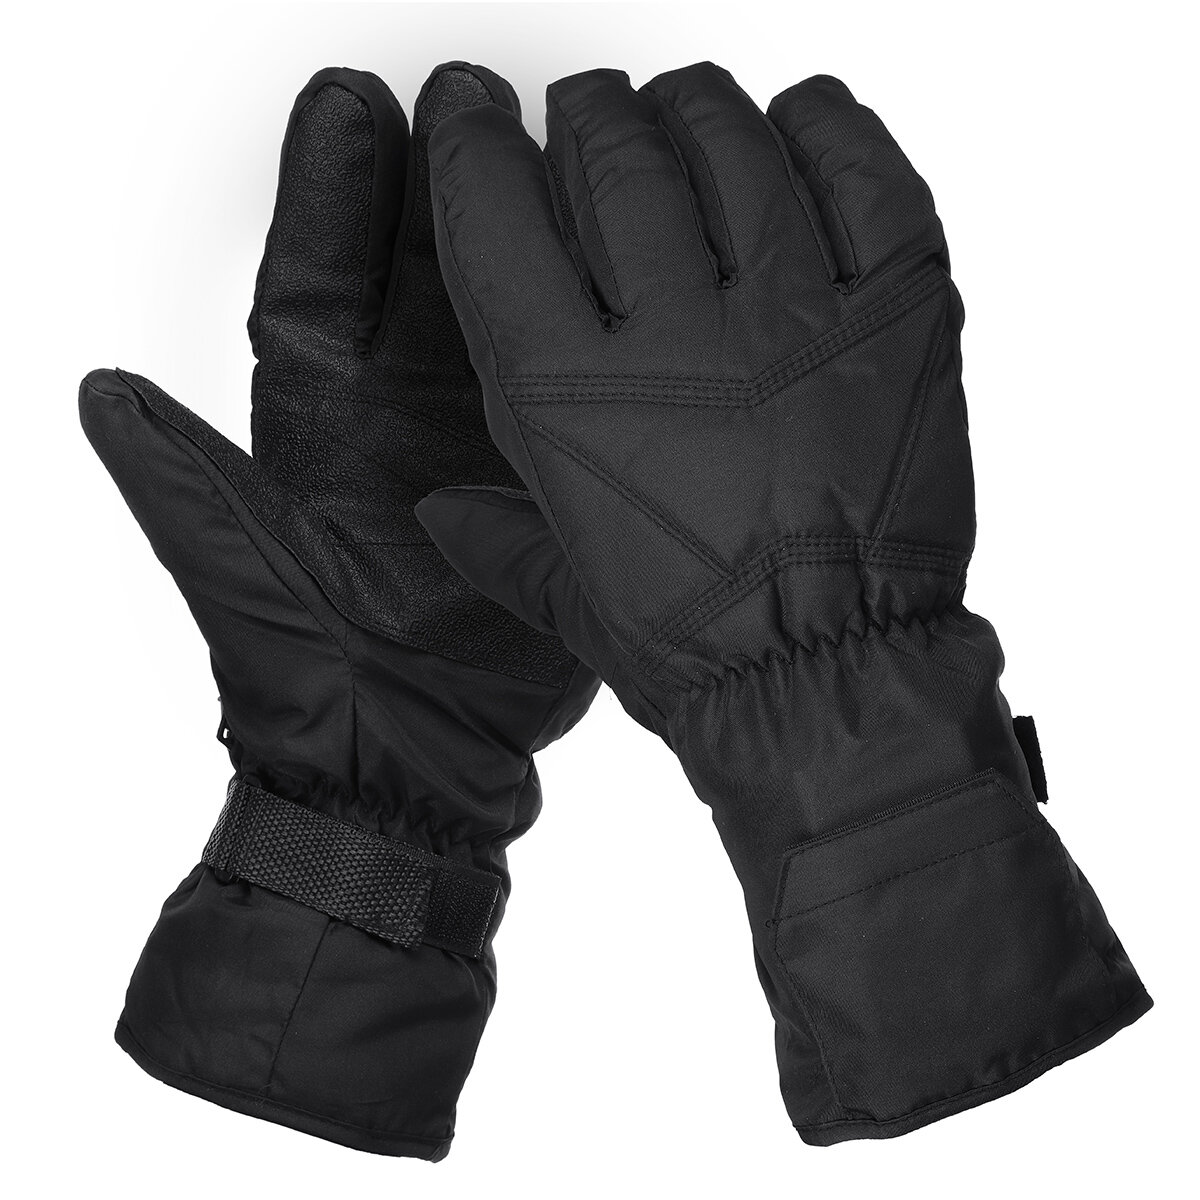 -40℃ Cold Resistance Heated Battery Powered Gloves Waterproof Thermal Ski Gloves